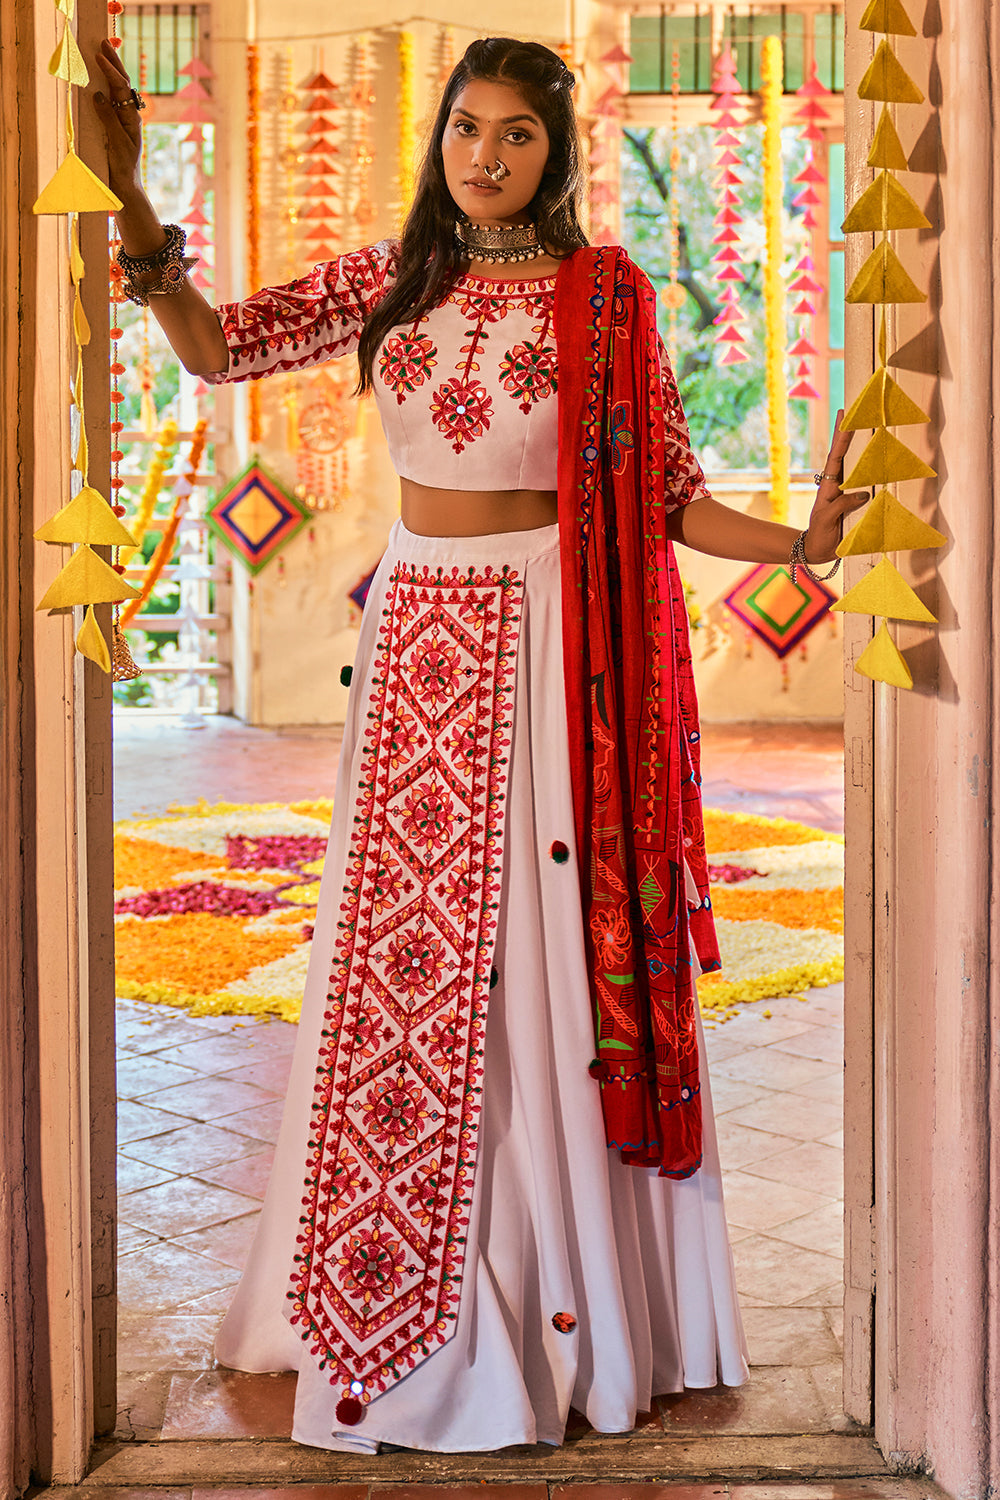 White Color Lehenga Choli in Georgette Material With Sequins and Thread  Embroidery Work Indian Wedding Lehengabridal Lengha/party Wear Dress - Etsy